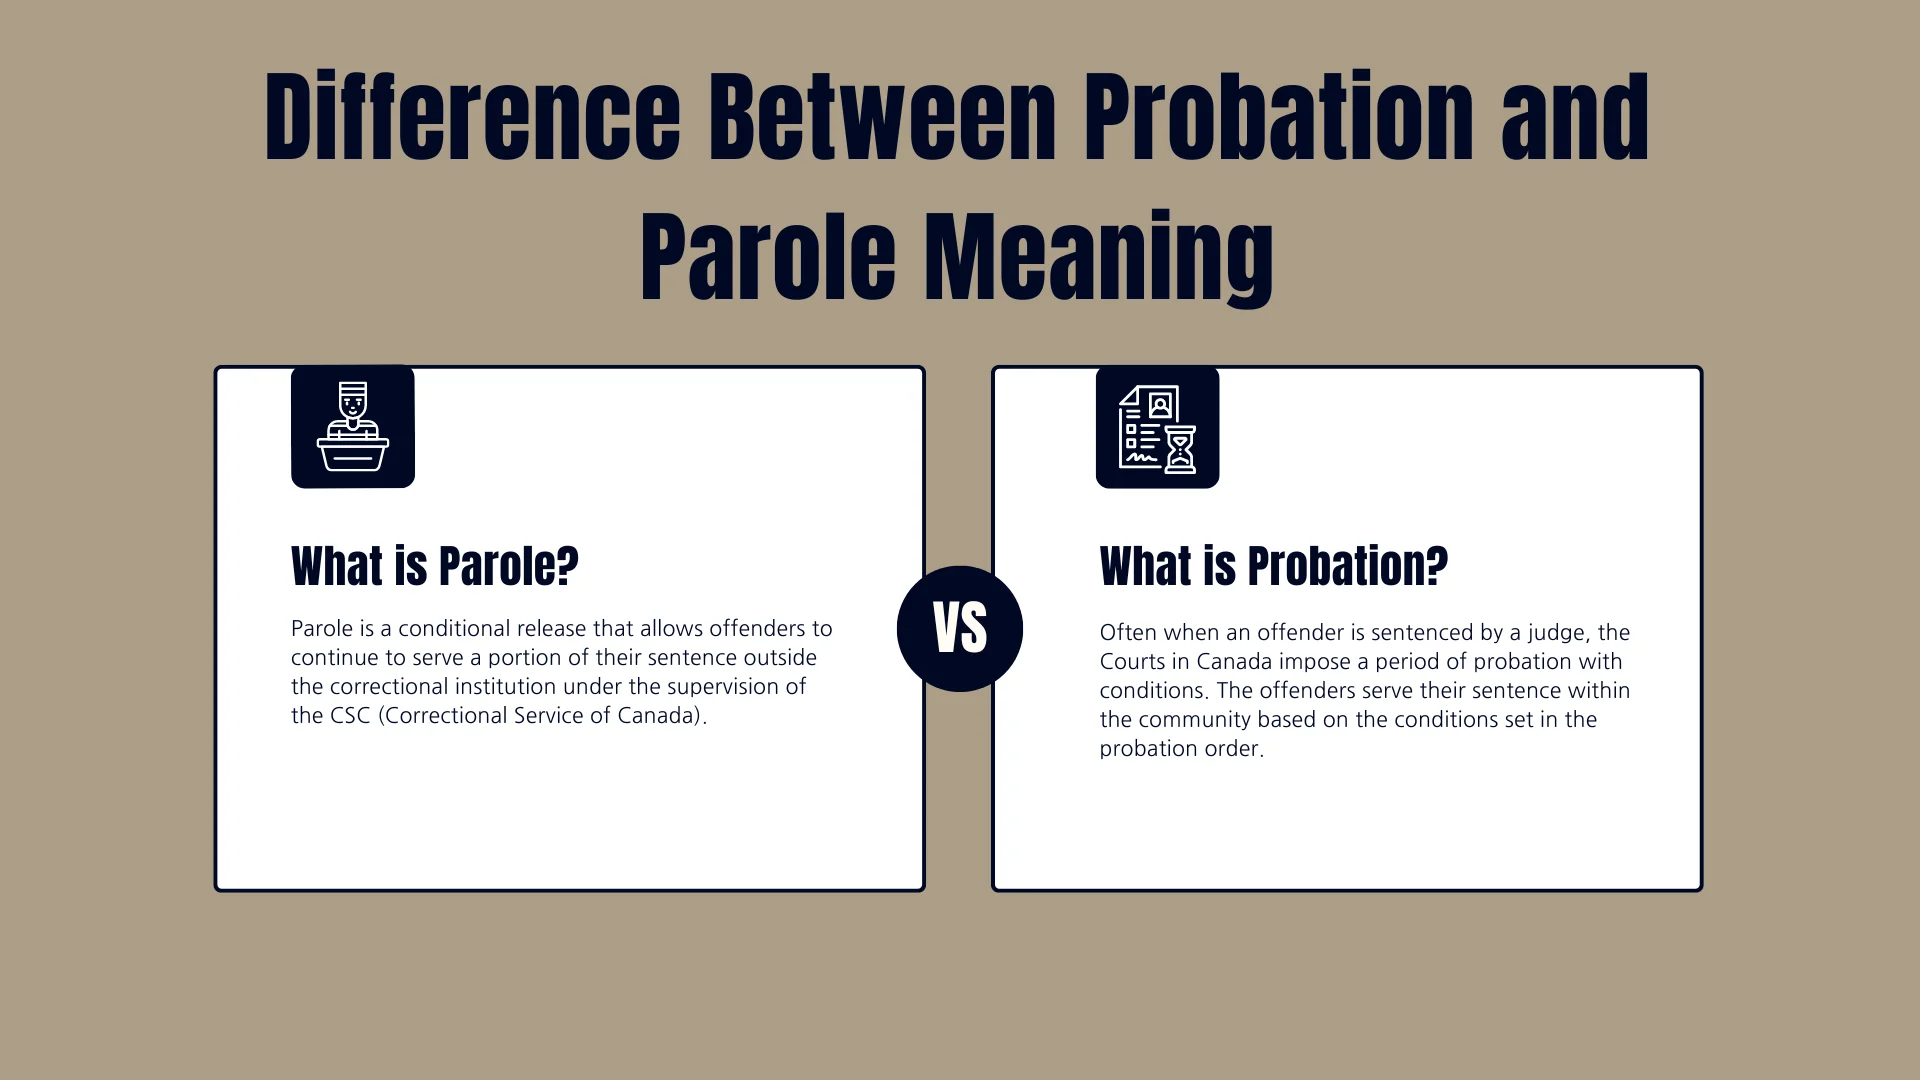 A comparison of the differences between the meaning of probation and parole